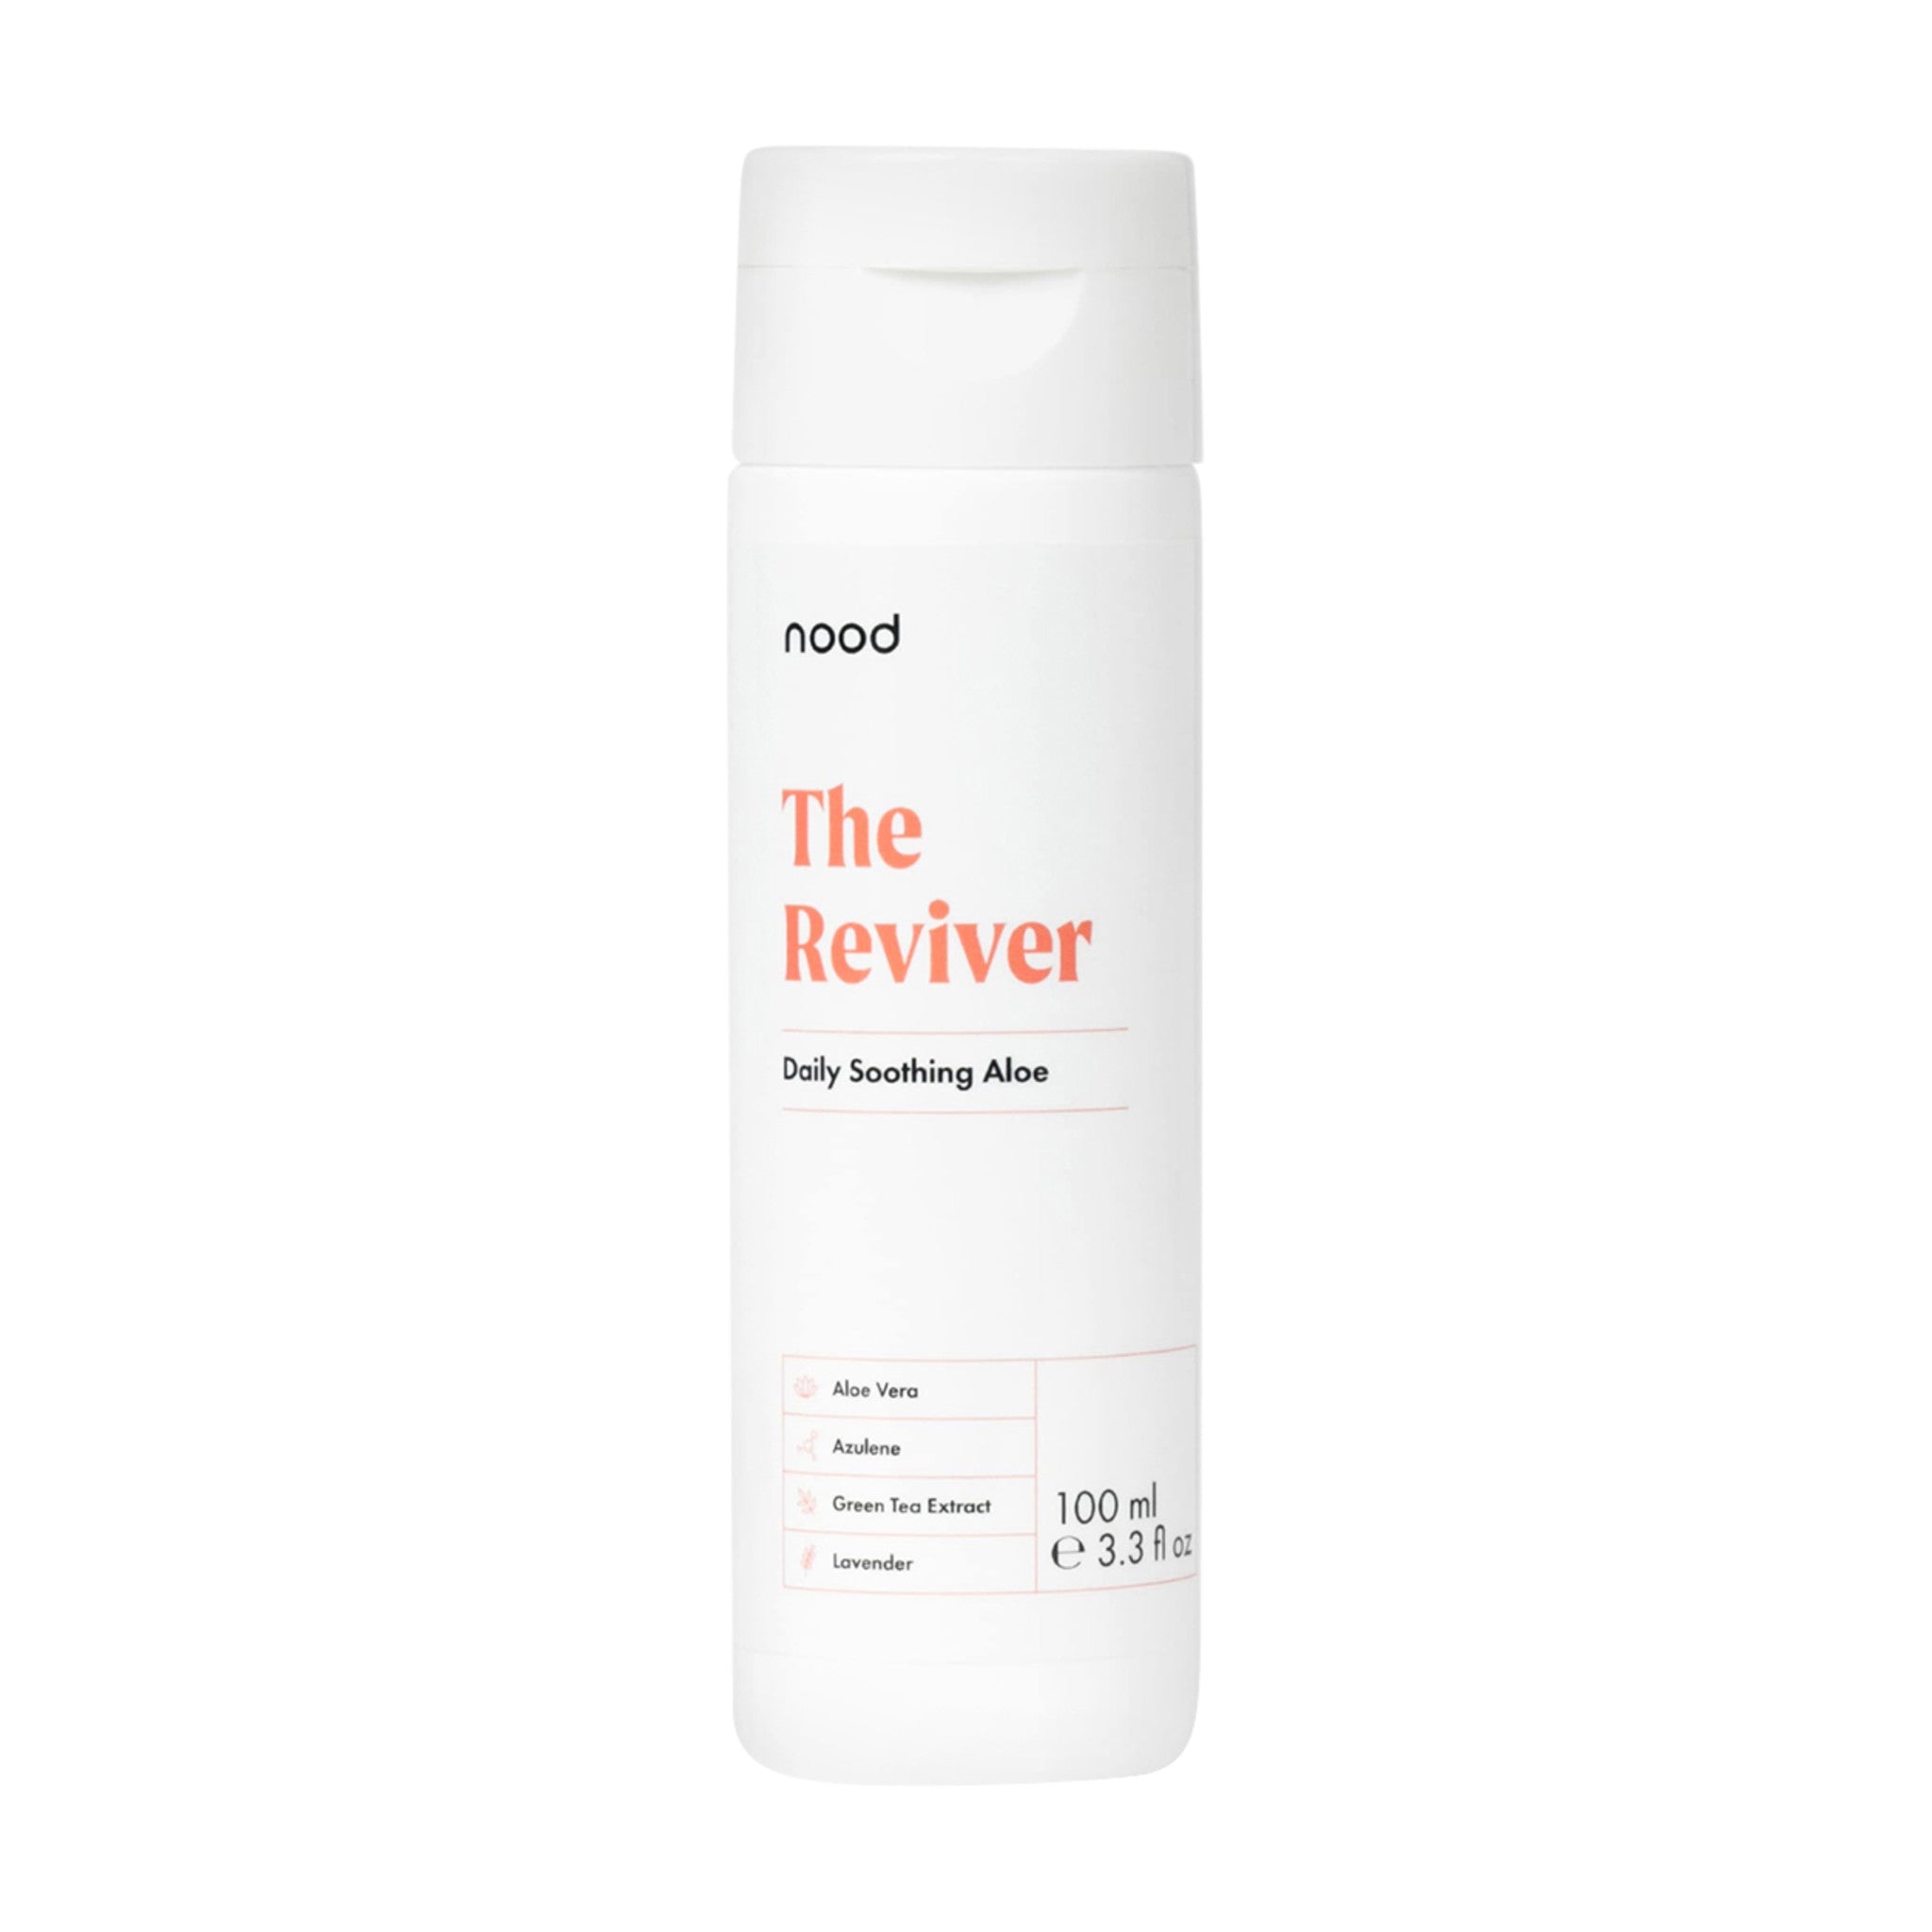 Nood The Reviver main image.